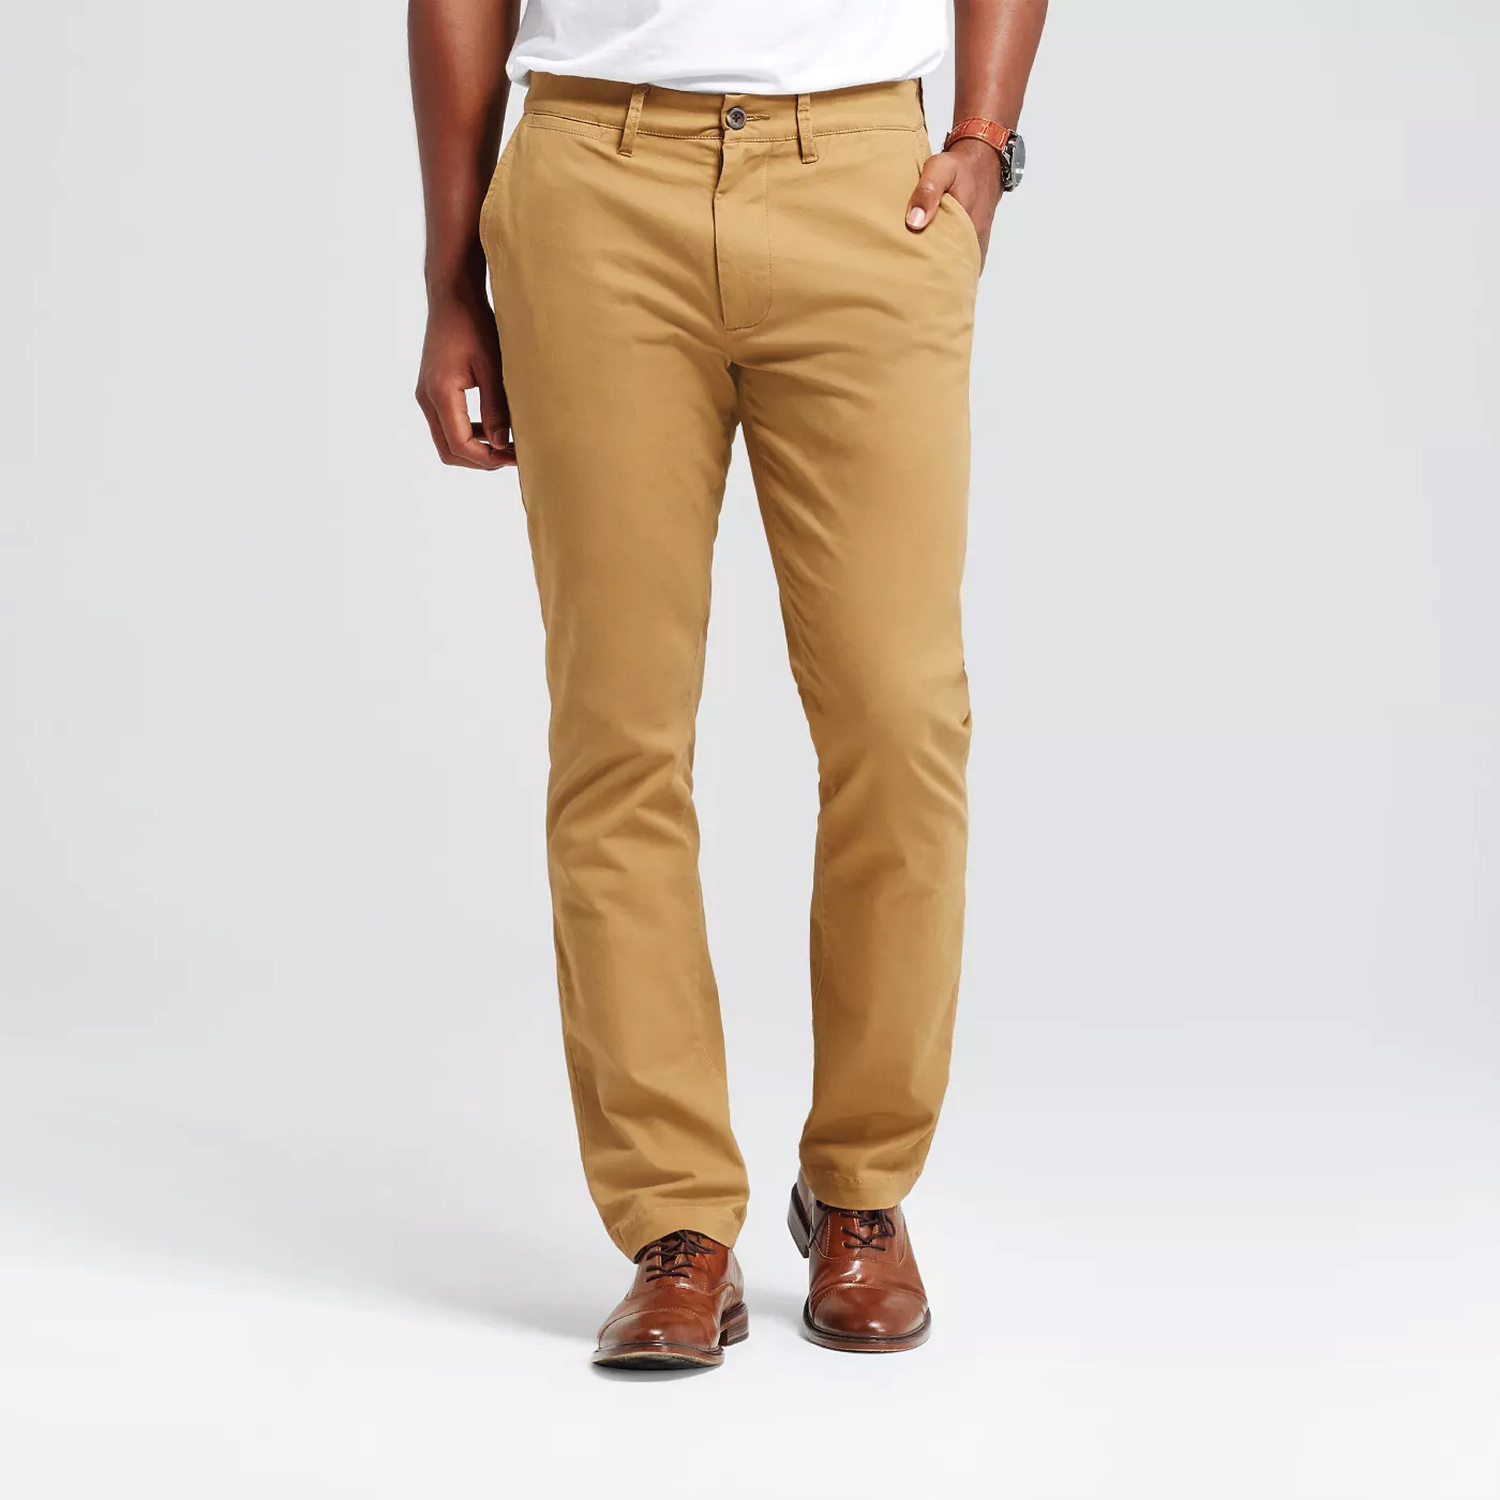 Fit Guide Mens Chinos Fits  Pants outfit men Men shirt style Mens chinos